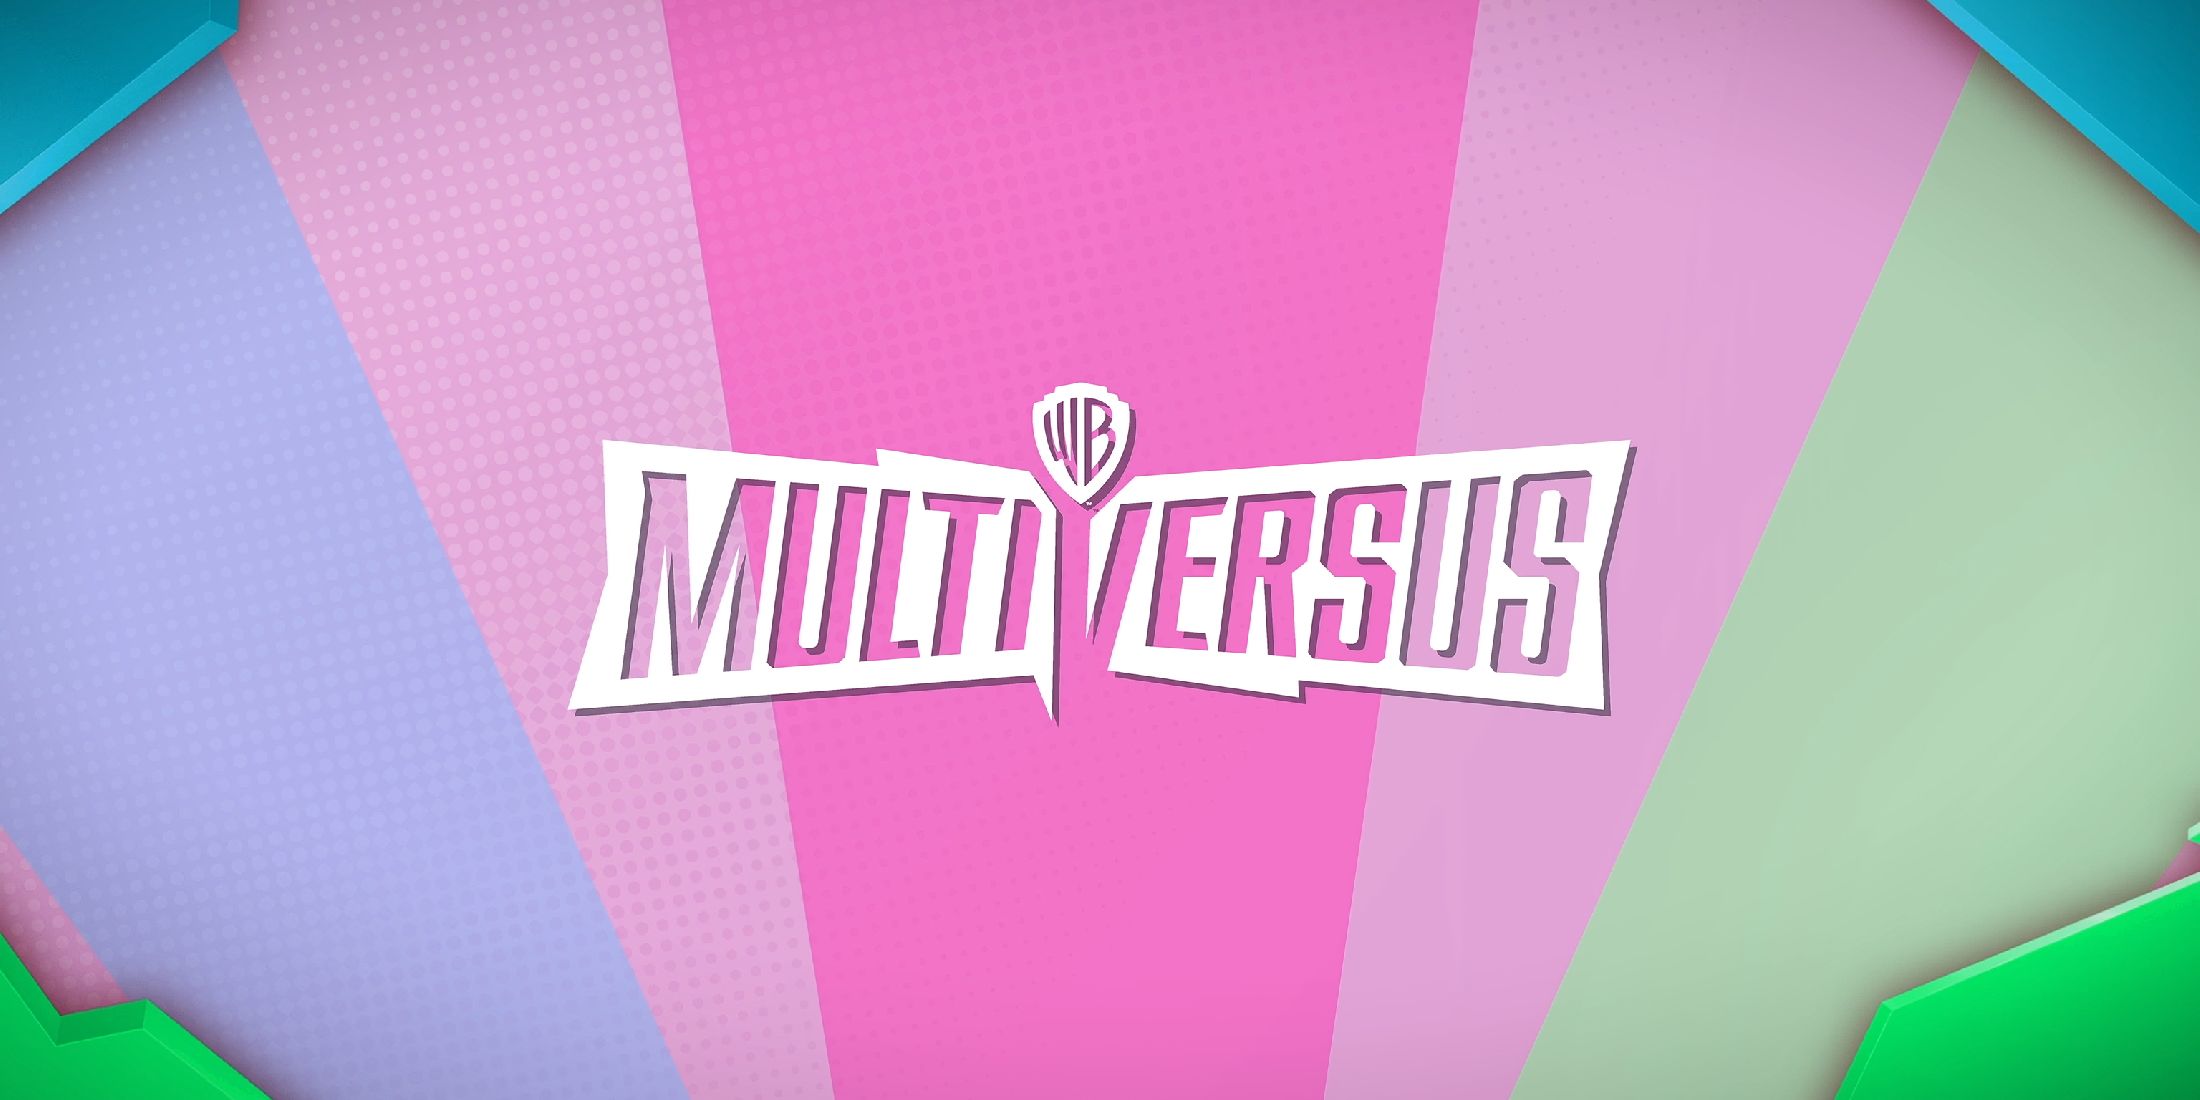 The logo for MultiVersus set against a multi-colored background based on The Powerpuff Girls.